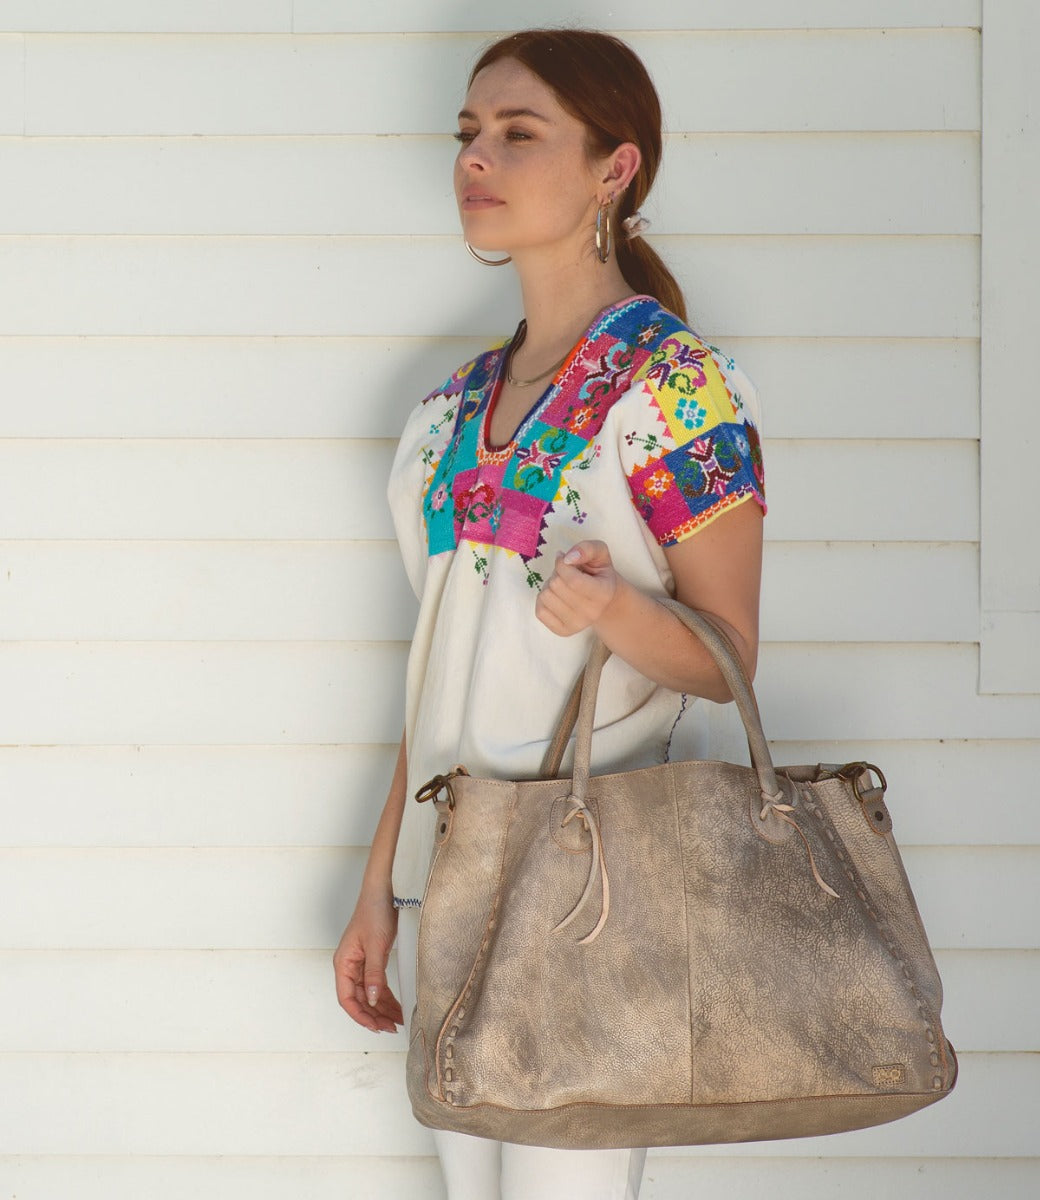 A woman wearing a colorful blouse and white shorts holding a Bed Stu Rockaway tote bag.